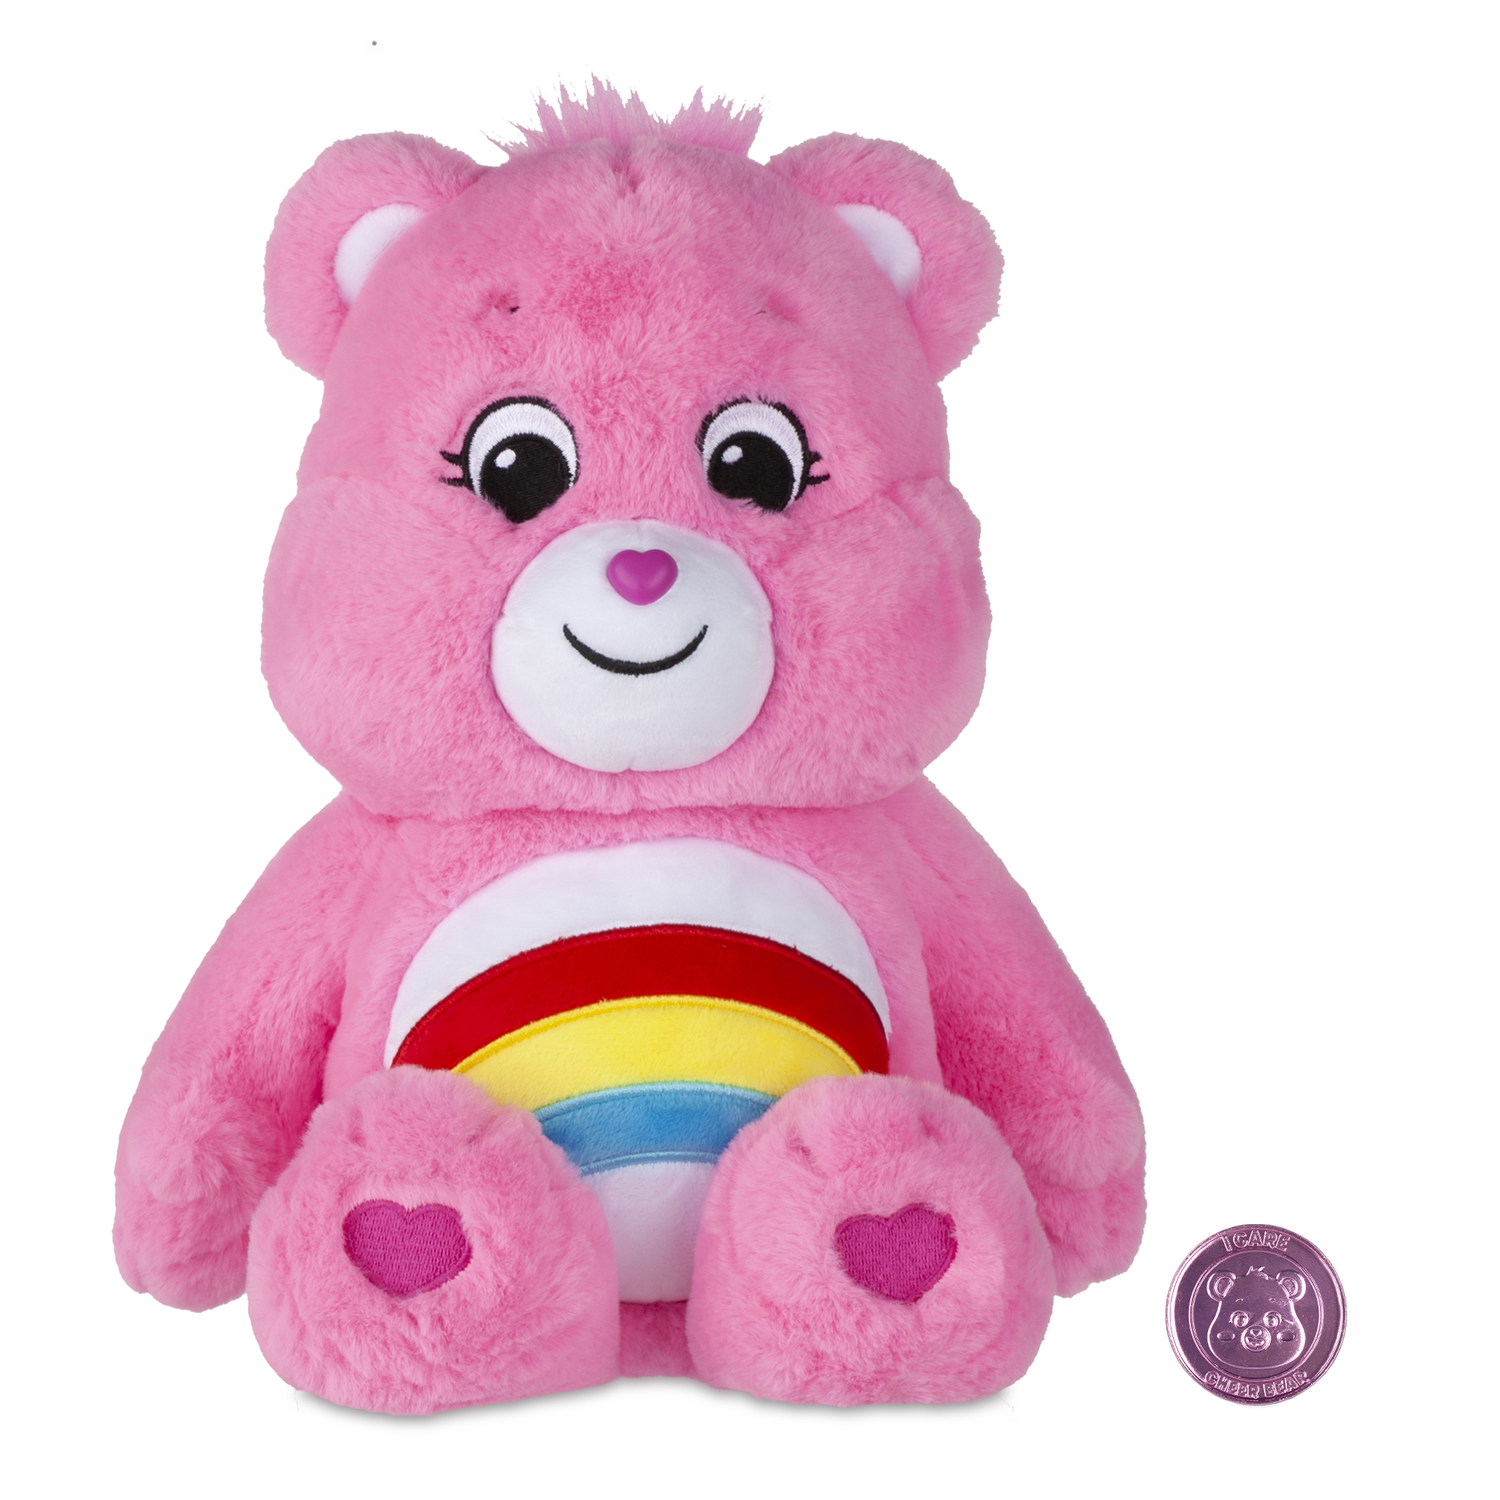 Care Bears Talking Cheer Bear 11" Pink Plush 2004 Says 6 Phrases Cute for sale online